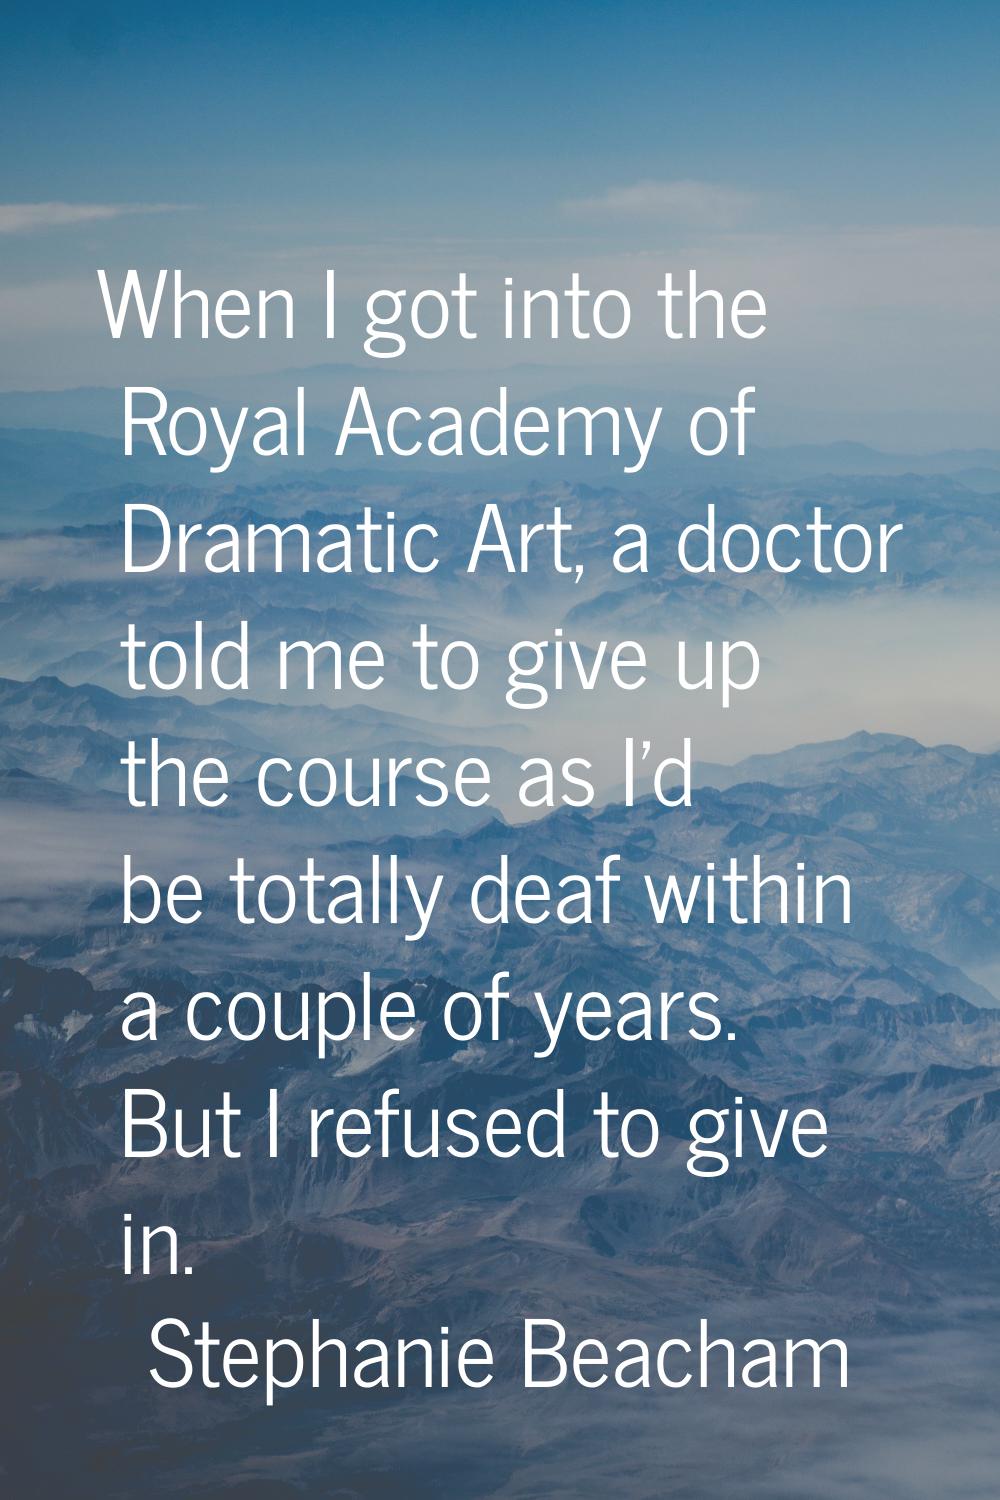 When I got into the Royal Academy of Dramatic Art, a doctor told me to give up the course as I'd be